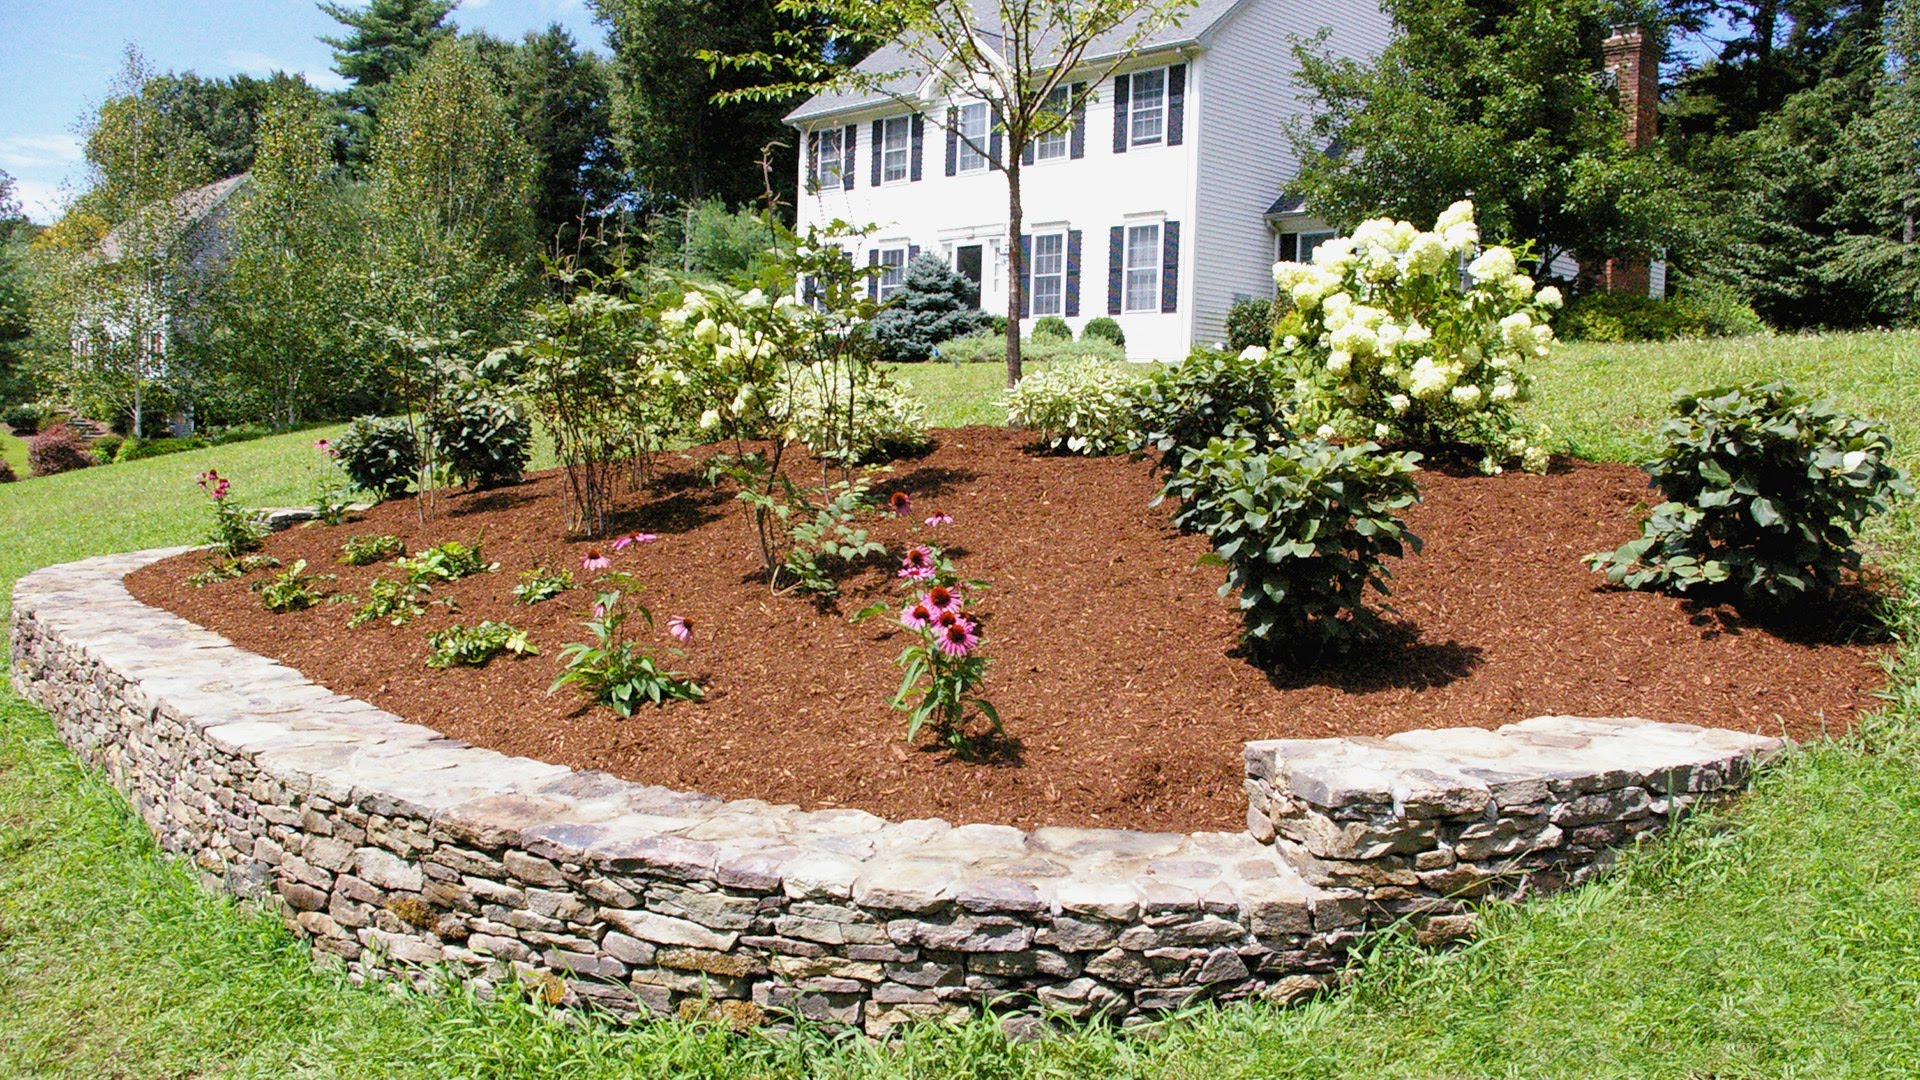 landscaping ideas for front yard landscaping ideas for a front yard: a berm for curb appeal - MCVZNOV